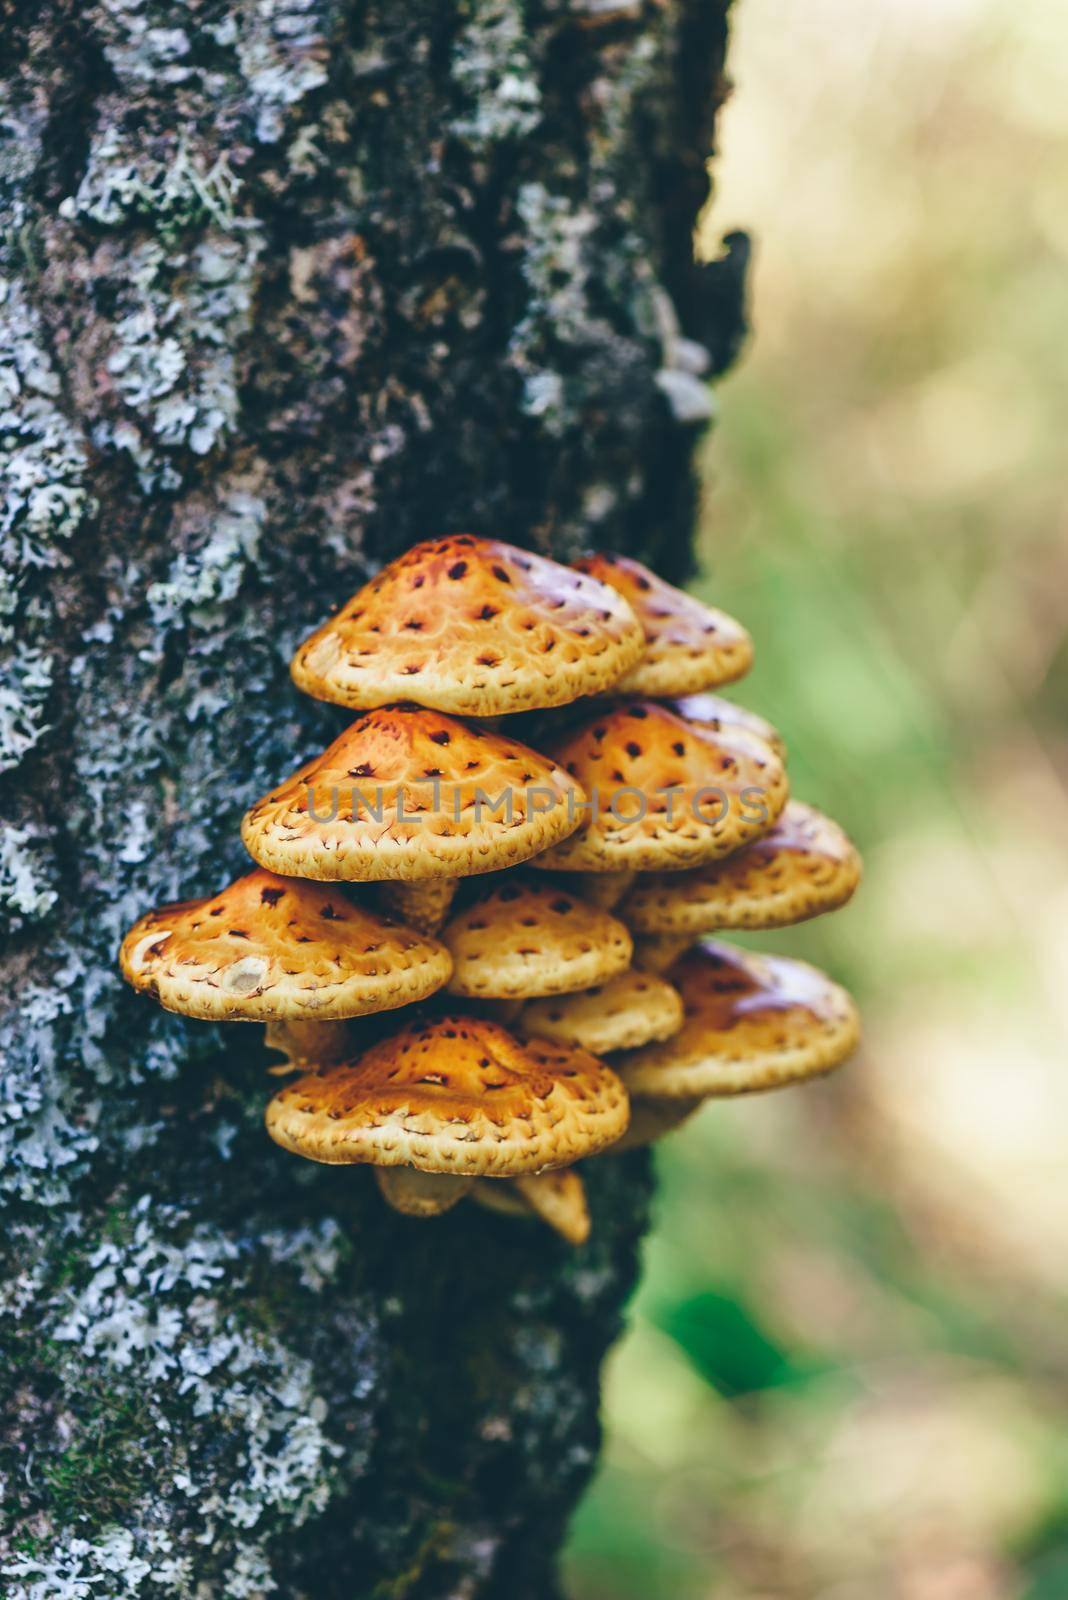 Pholiota aurivella mushrooms on a birch tree in the autumn forest